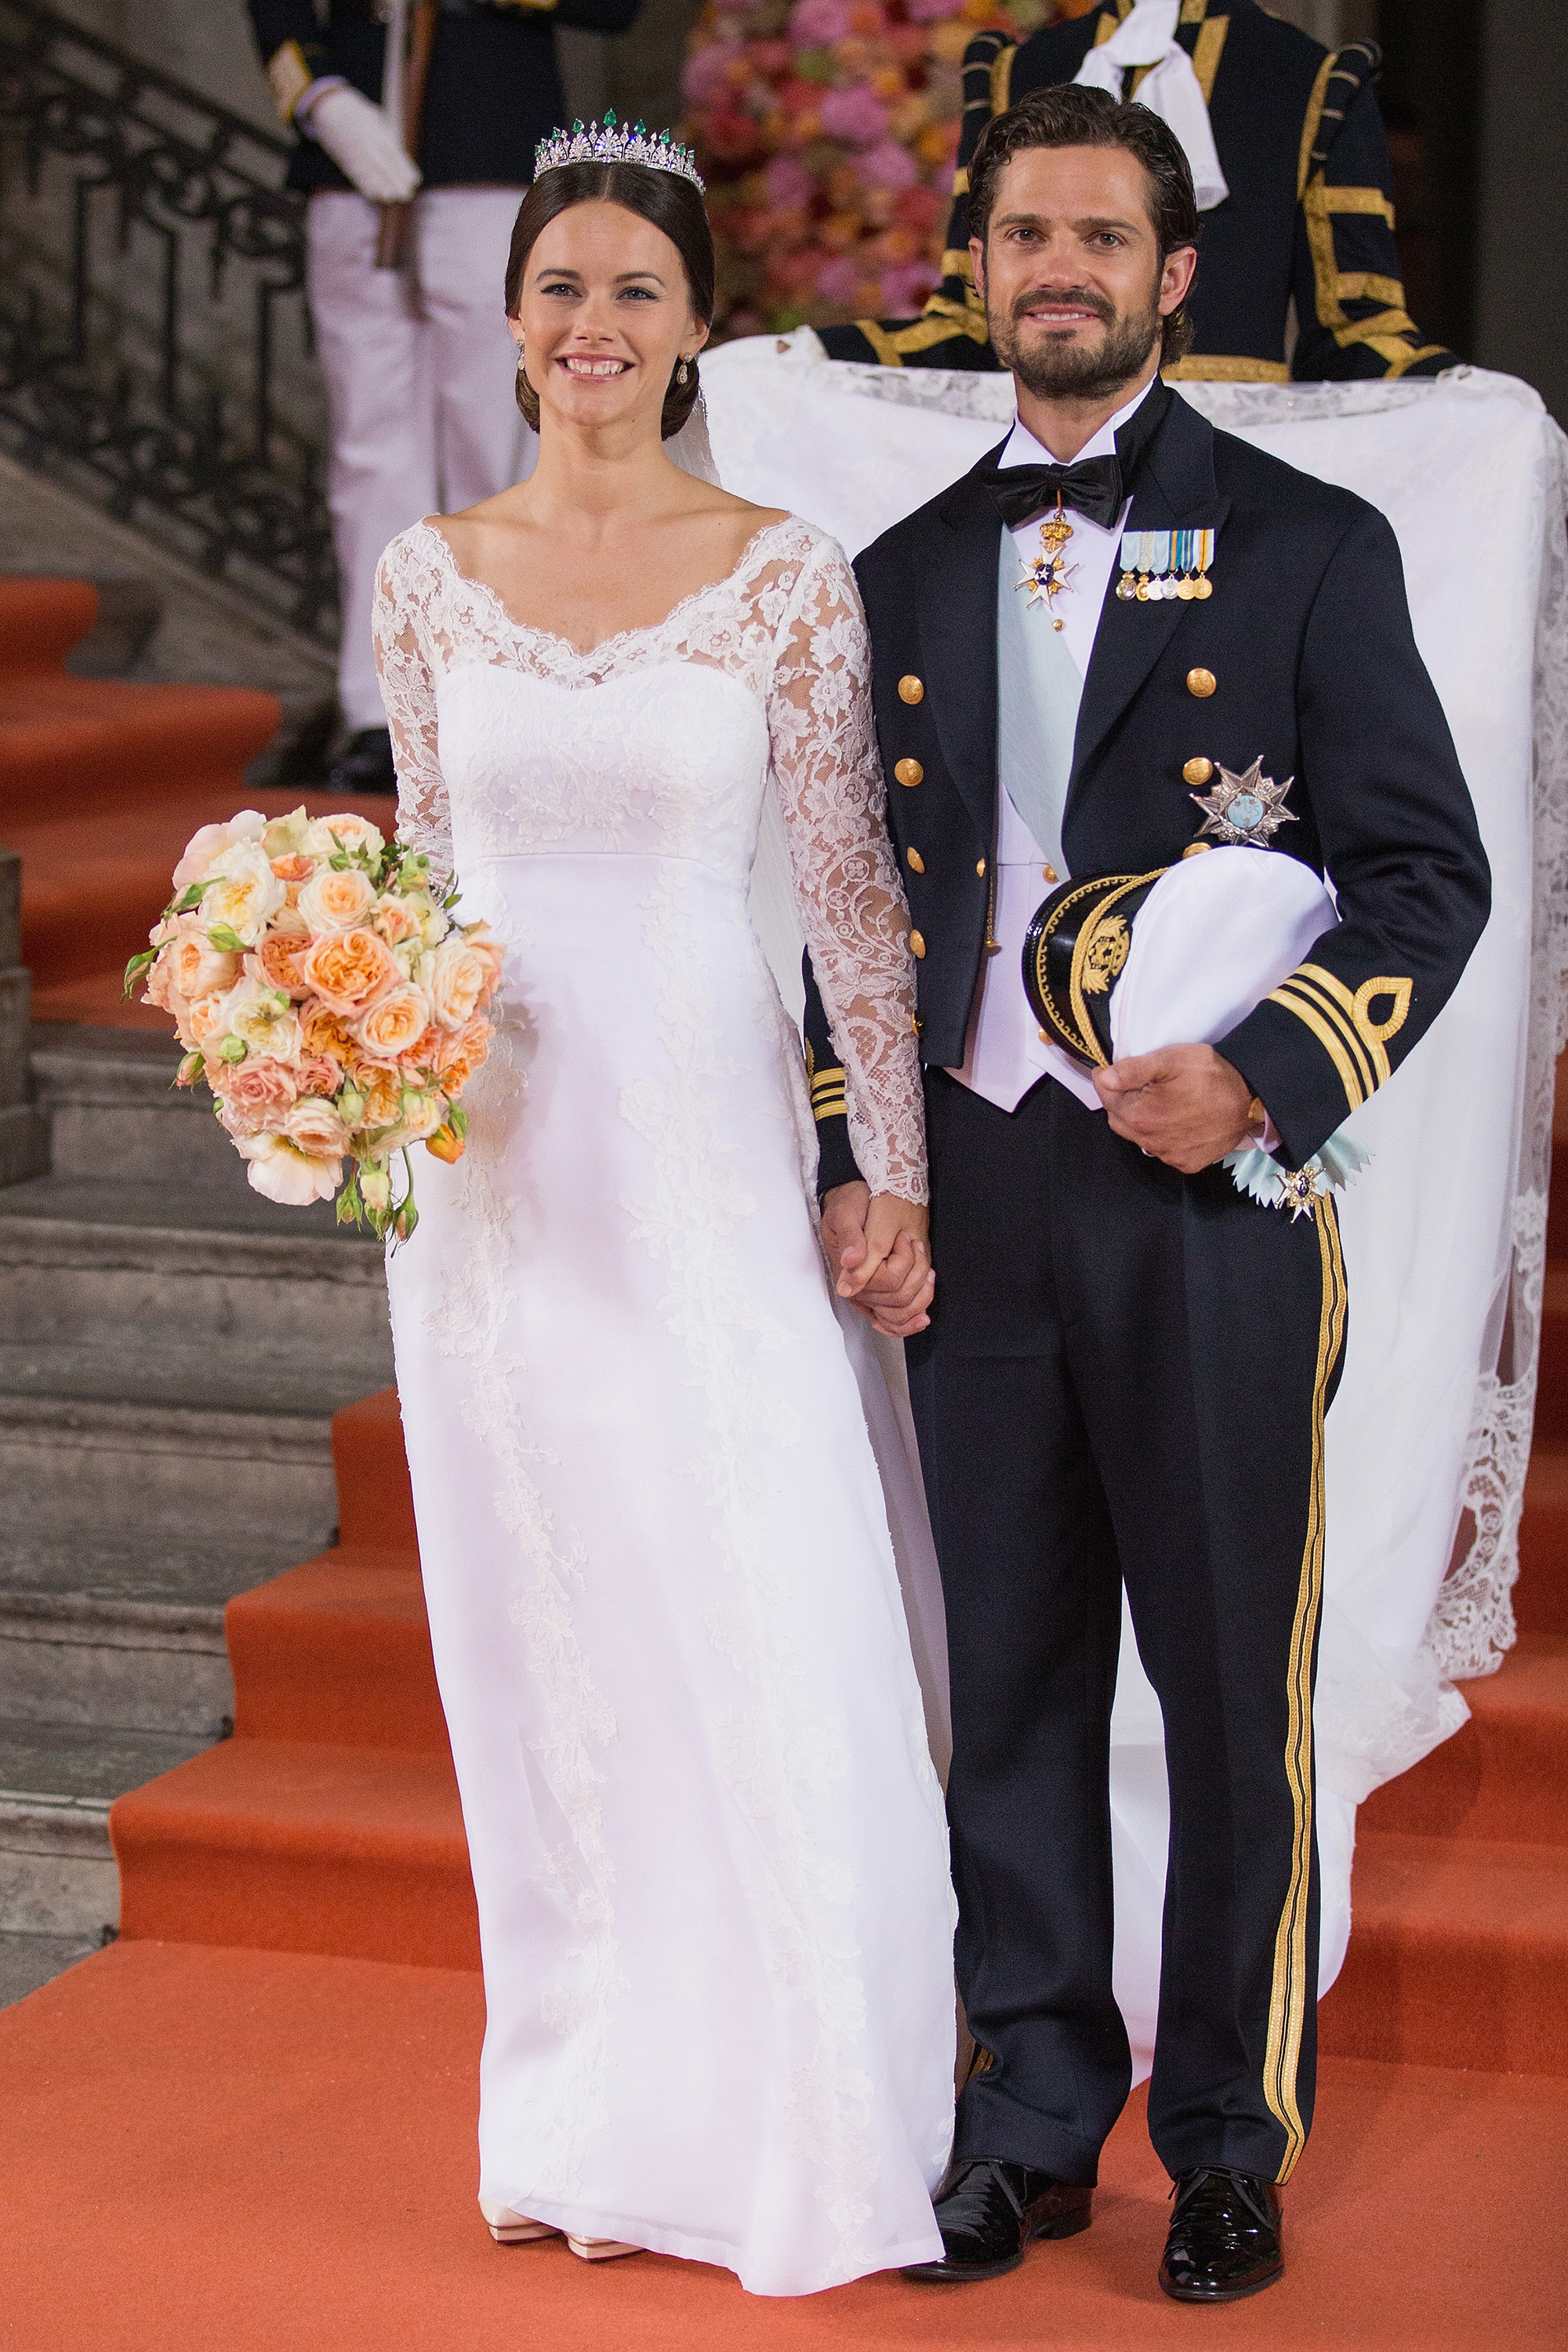 STOCKHOLM, SWEDEN - JUNE 13: Prince Carl Philip of Sweden is seen with his new wife Princess Sofia, Duchess of Varmland after their marriage ceremony on June 13, 2015 in Stockholm, Sweden. (Photo by Andreas Rentz/Getty Images)